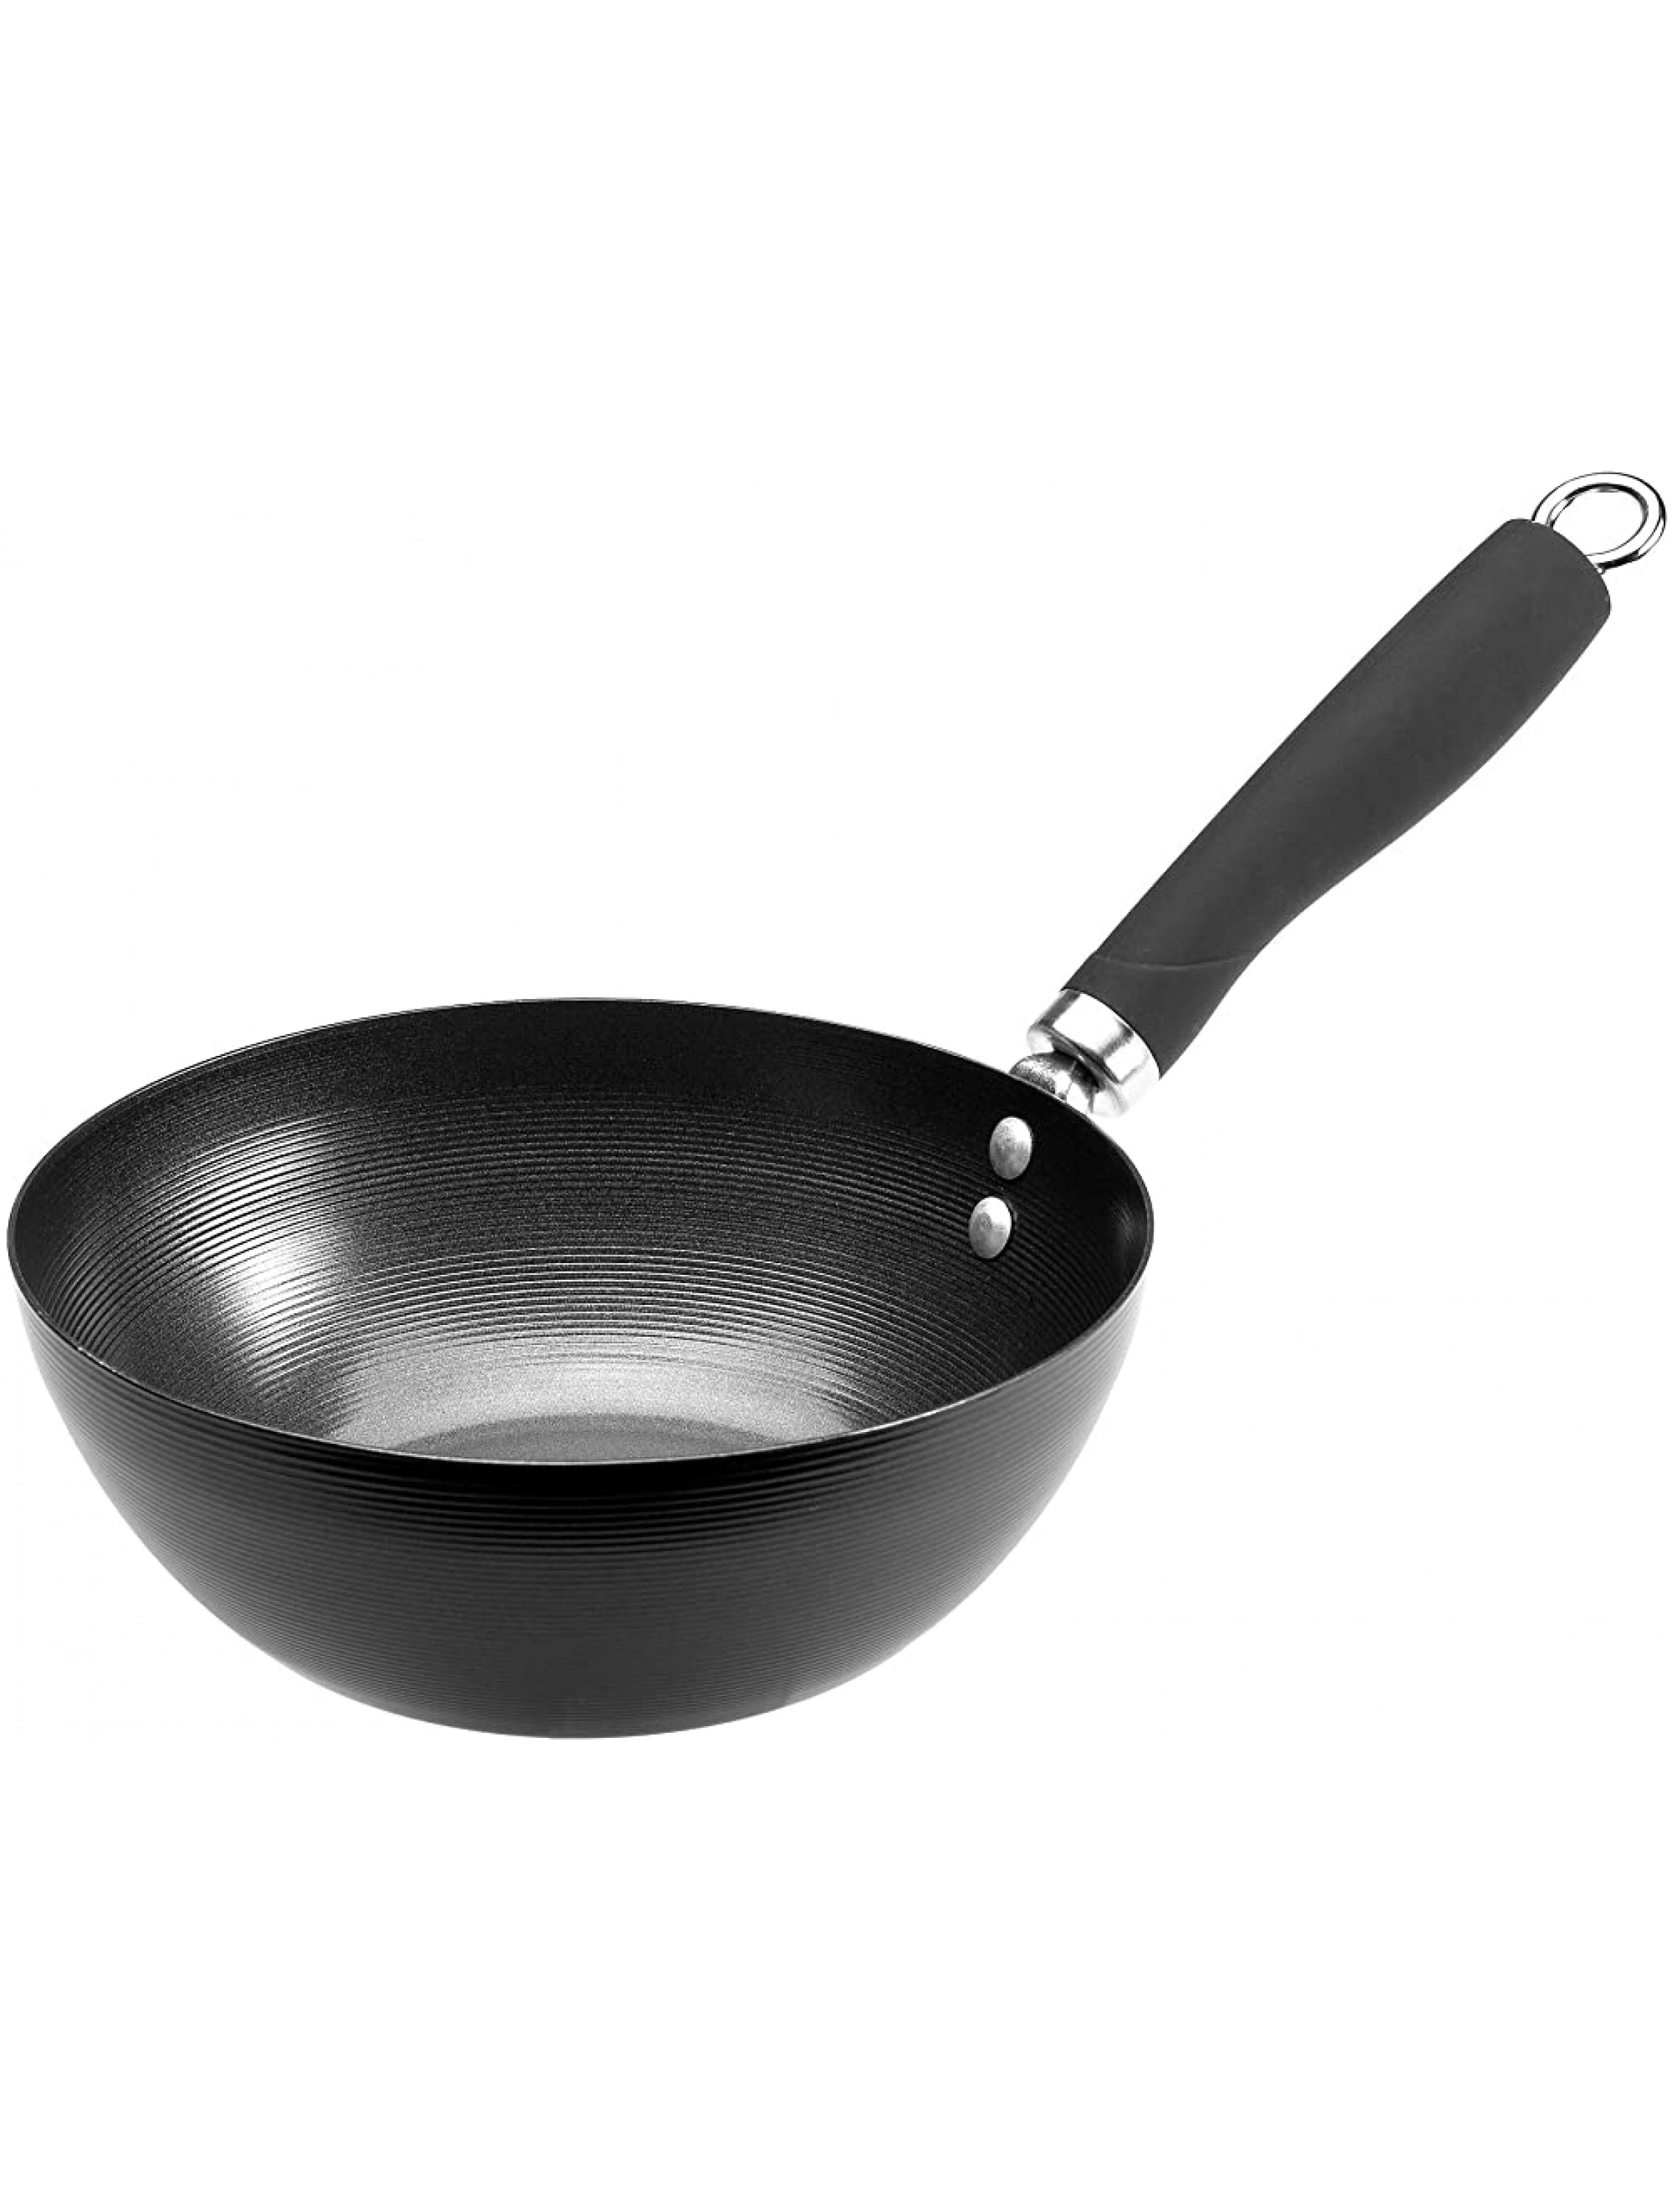 Ecolution Non-Stick Carbon Steel Wok with Soft Touch Riveted Handle 8,Black - BNVPOKQQK